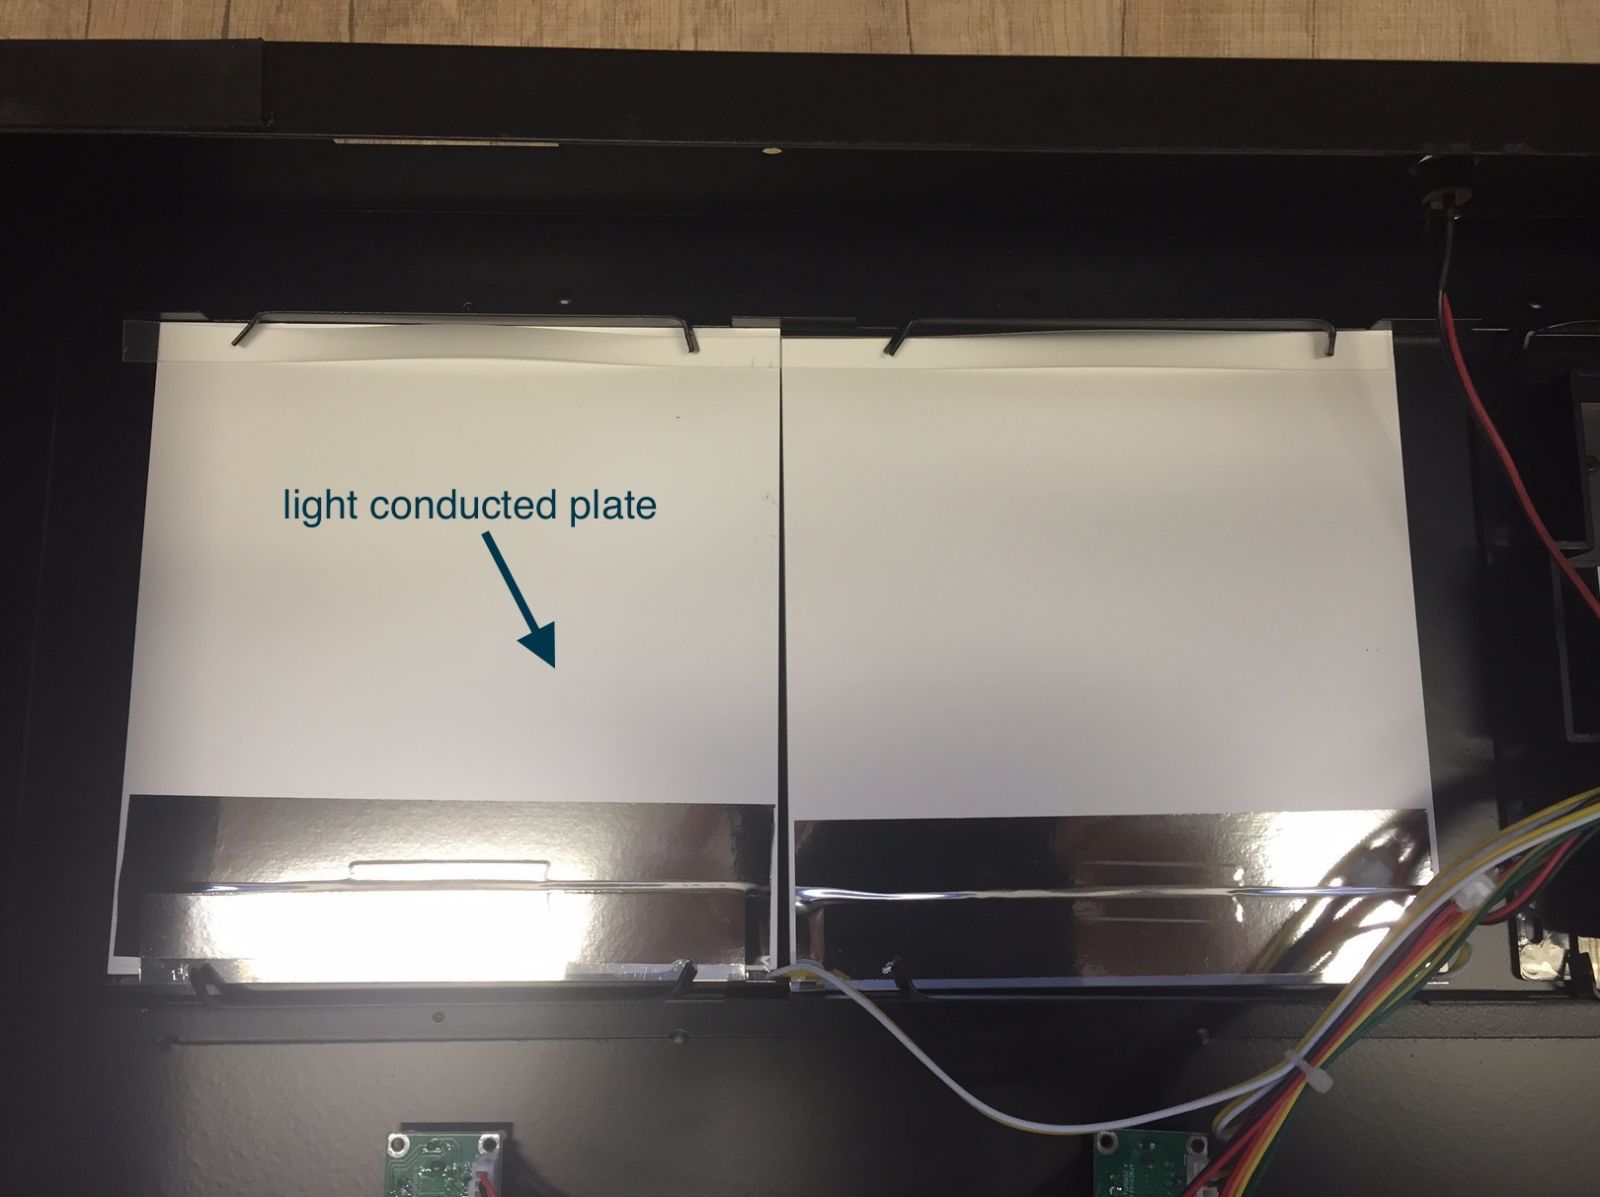 light-conducted-plate-in-demonstration-bench